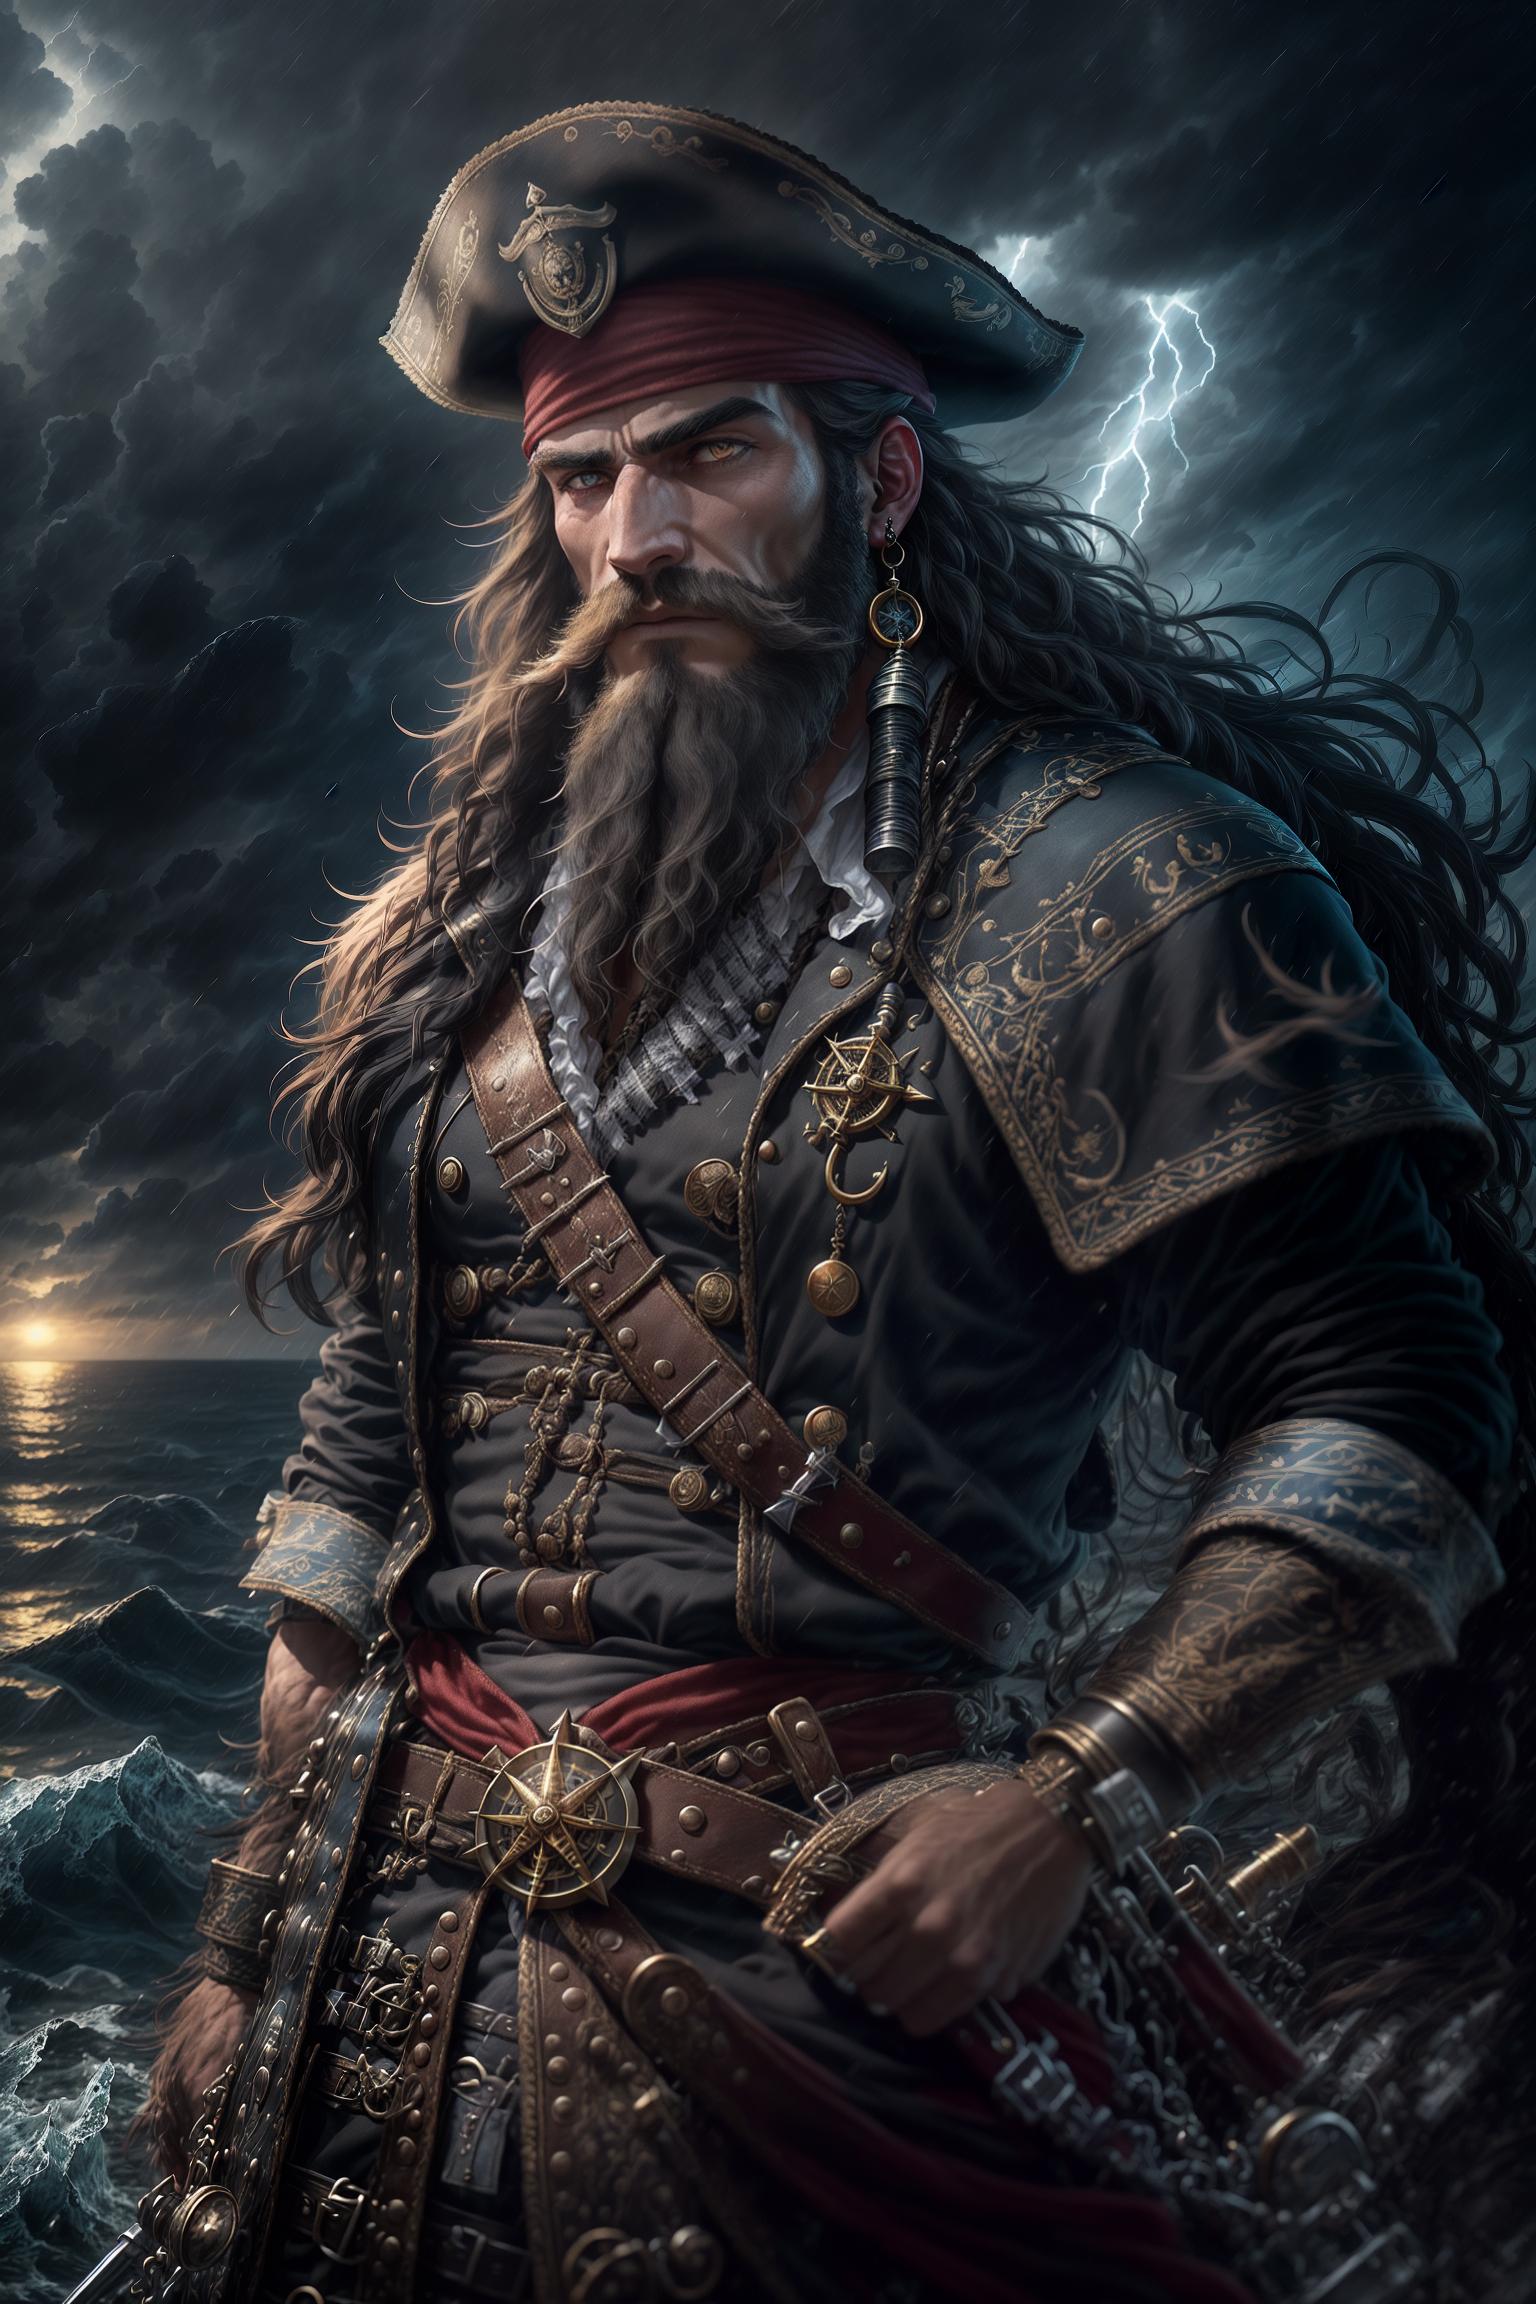  Blackbeard, (rugged appearance:1.2), (with deep set eyes), (a face full of thick beard), (skin tanned dark by the sea breeze), (black long hair:1.0), (should have a head of unkempt black long hair), (plus a dense beard), (the origin of his name "Blackbeard"), (pirate attire:1.0), (wearing typical pirate clothing), (broad brimmed hat), (earrings), (neck adorned with nautical items), (such as a compass or telescope), (wielding a sword and a flintlock), (ferocious gaze:1.0), (eyes gleaming with greed and cruelty), (may reveal an insatiable desire for treasure), (marine environment:1.2), (main scene is the vast and stormy sea), (including some severe weather elements), (such as storm clouds, thunder, and lightning), (to increase the tension), ( hyperrealistic, full body, detailed clothing, highly detailed, cinematic lighting, stunningly beautiful, intricate, sharp focus, f/1. 8, 85mm, (centered image composition), (professionally color graded), ((bright soft diffused light)), volumetric fog, trending on instagram, trending on tumblr, HDR 4K, 8K